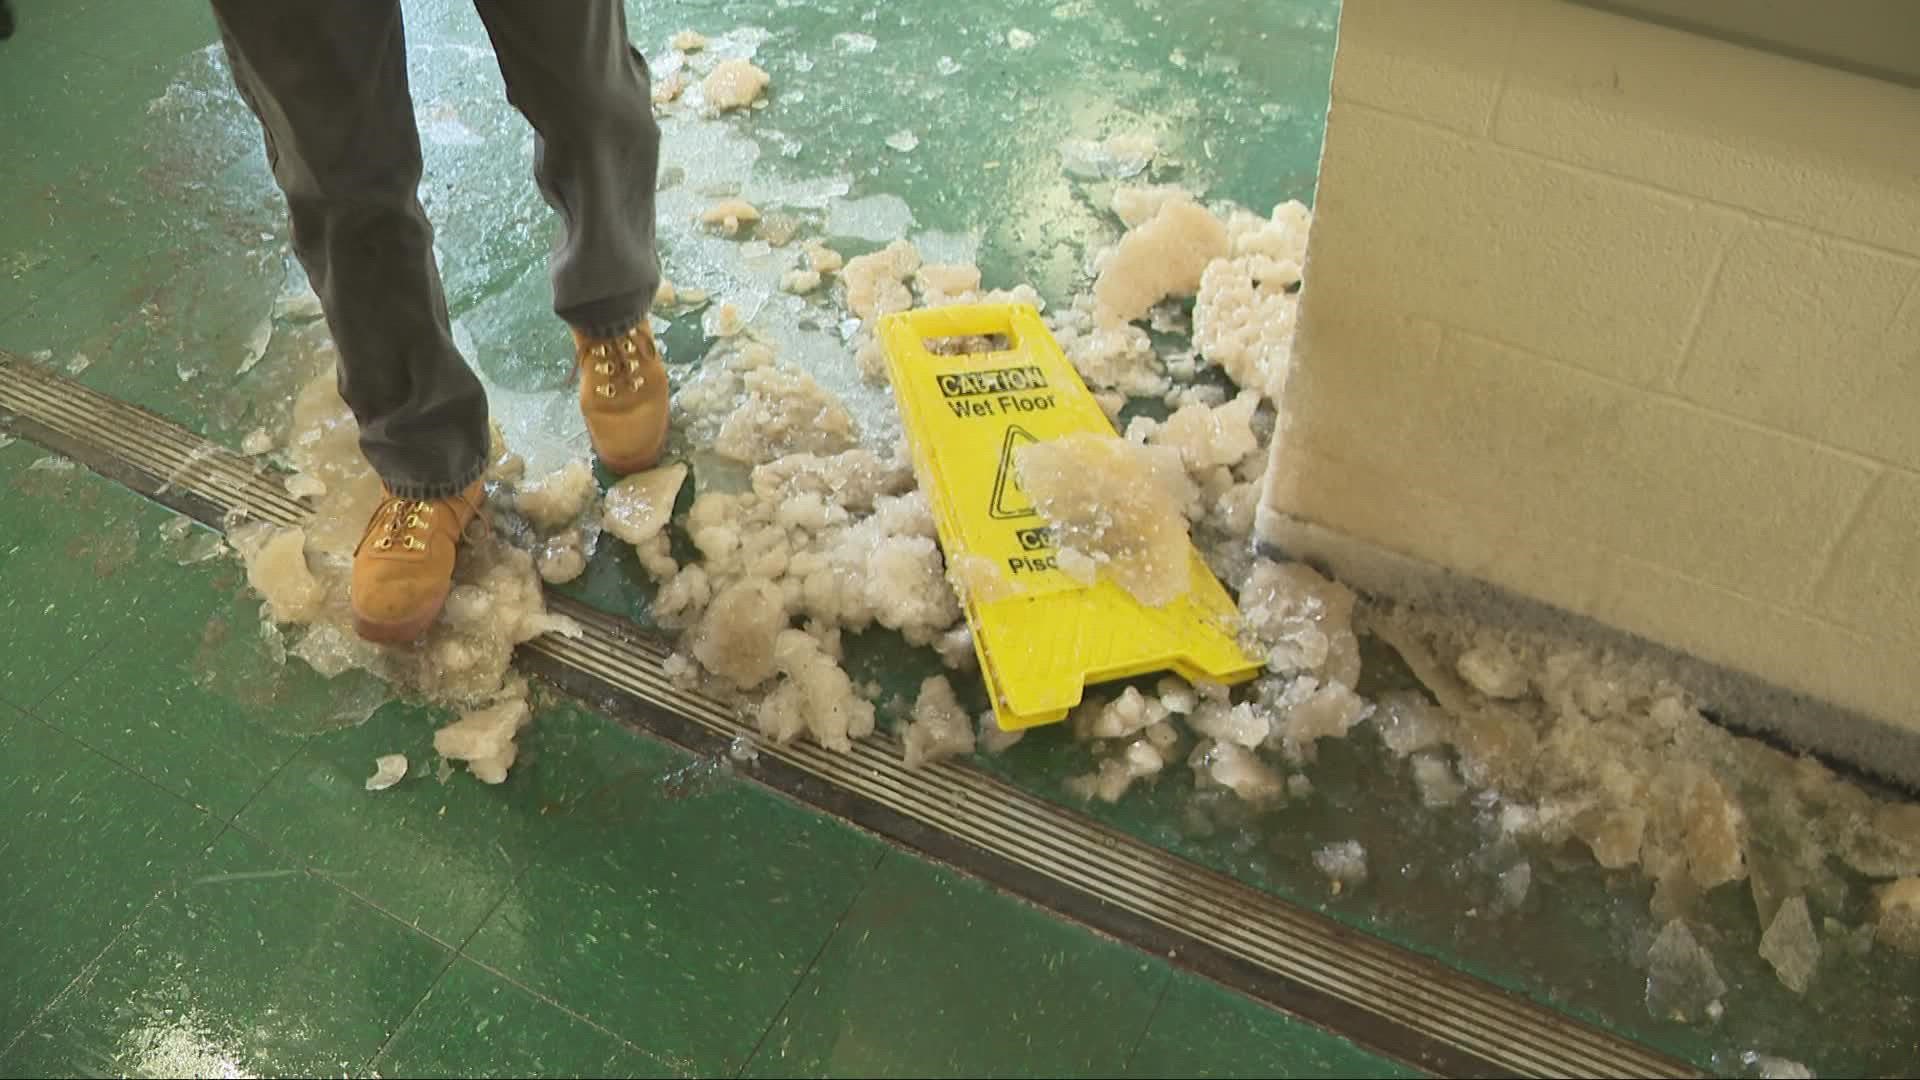 Tenants tell 3News even though it's been days since the pipes burst, CMHA management still has not addressed the issue.